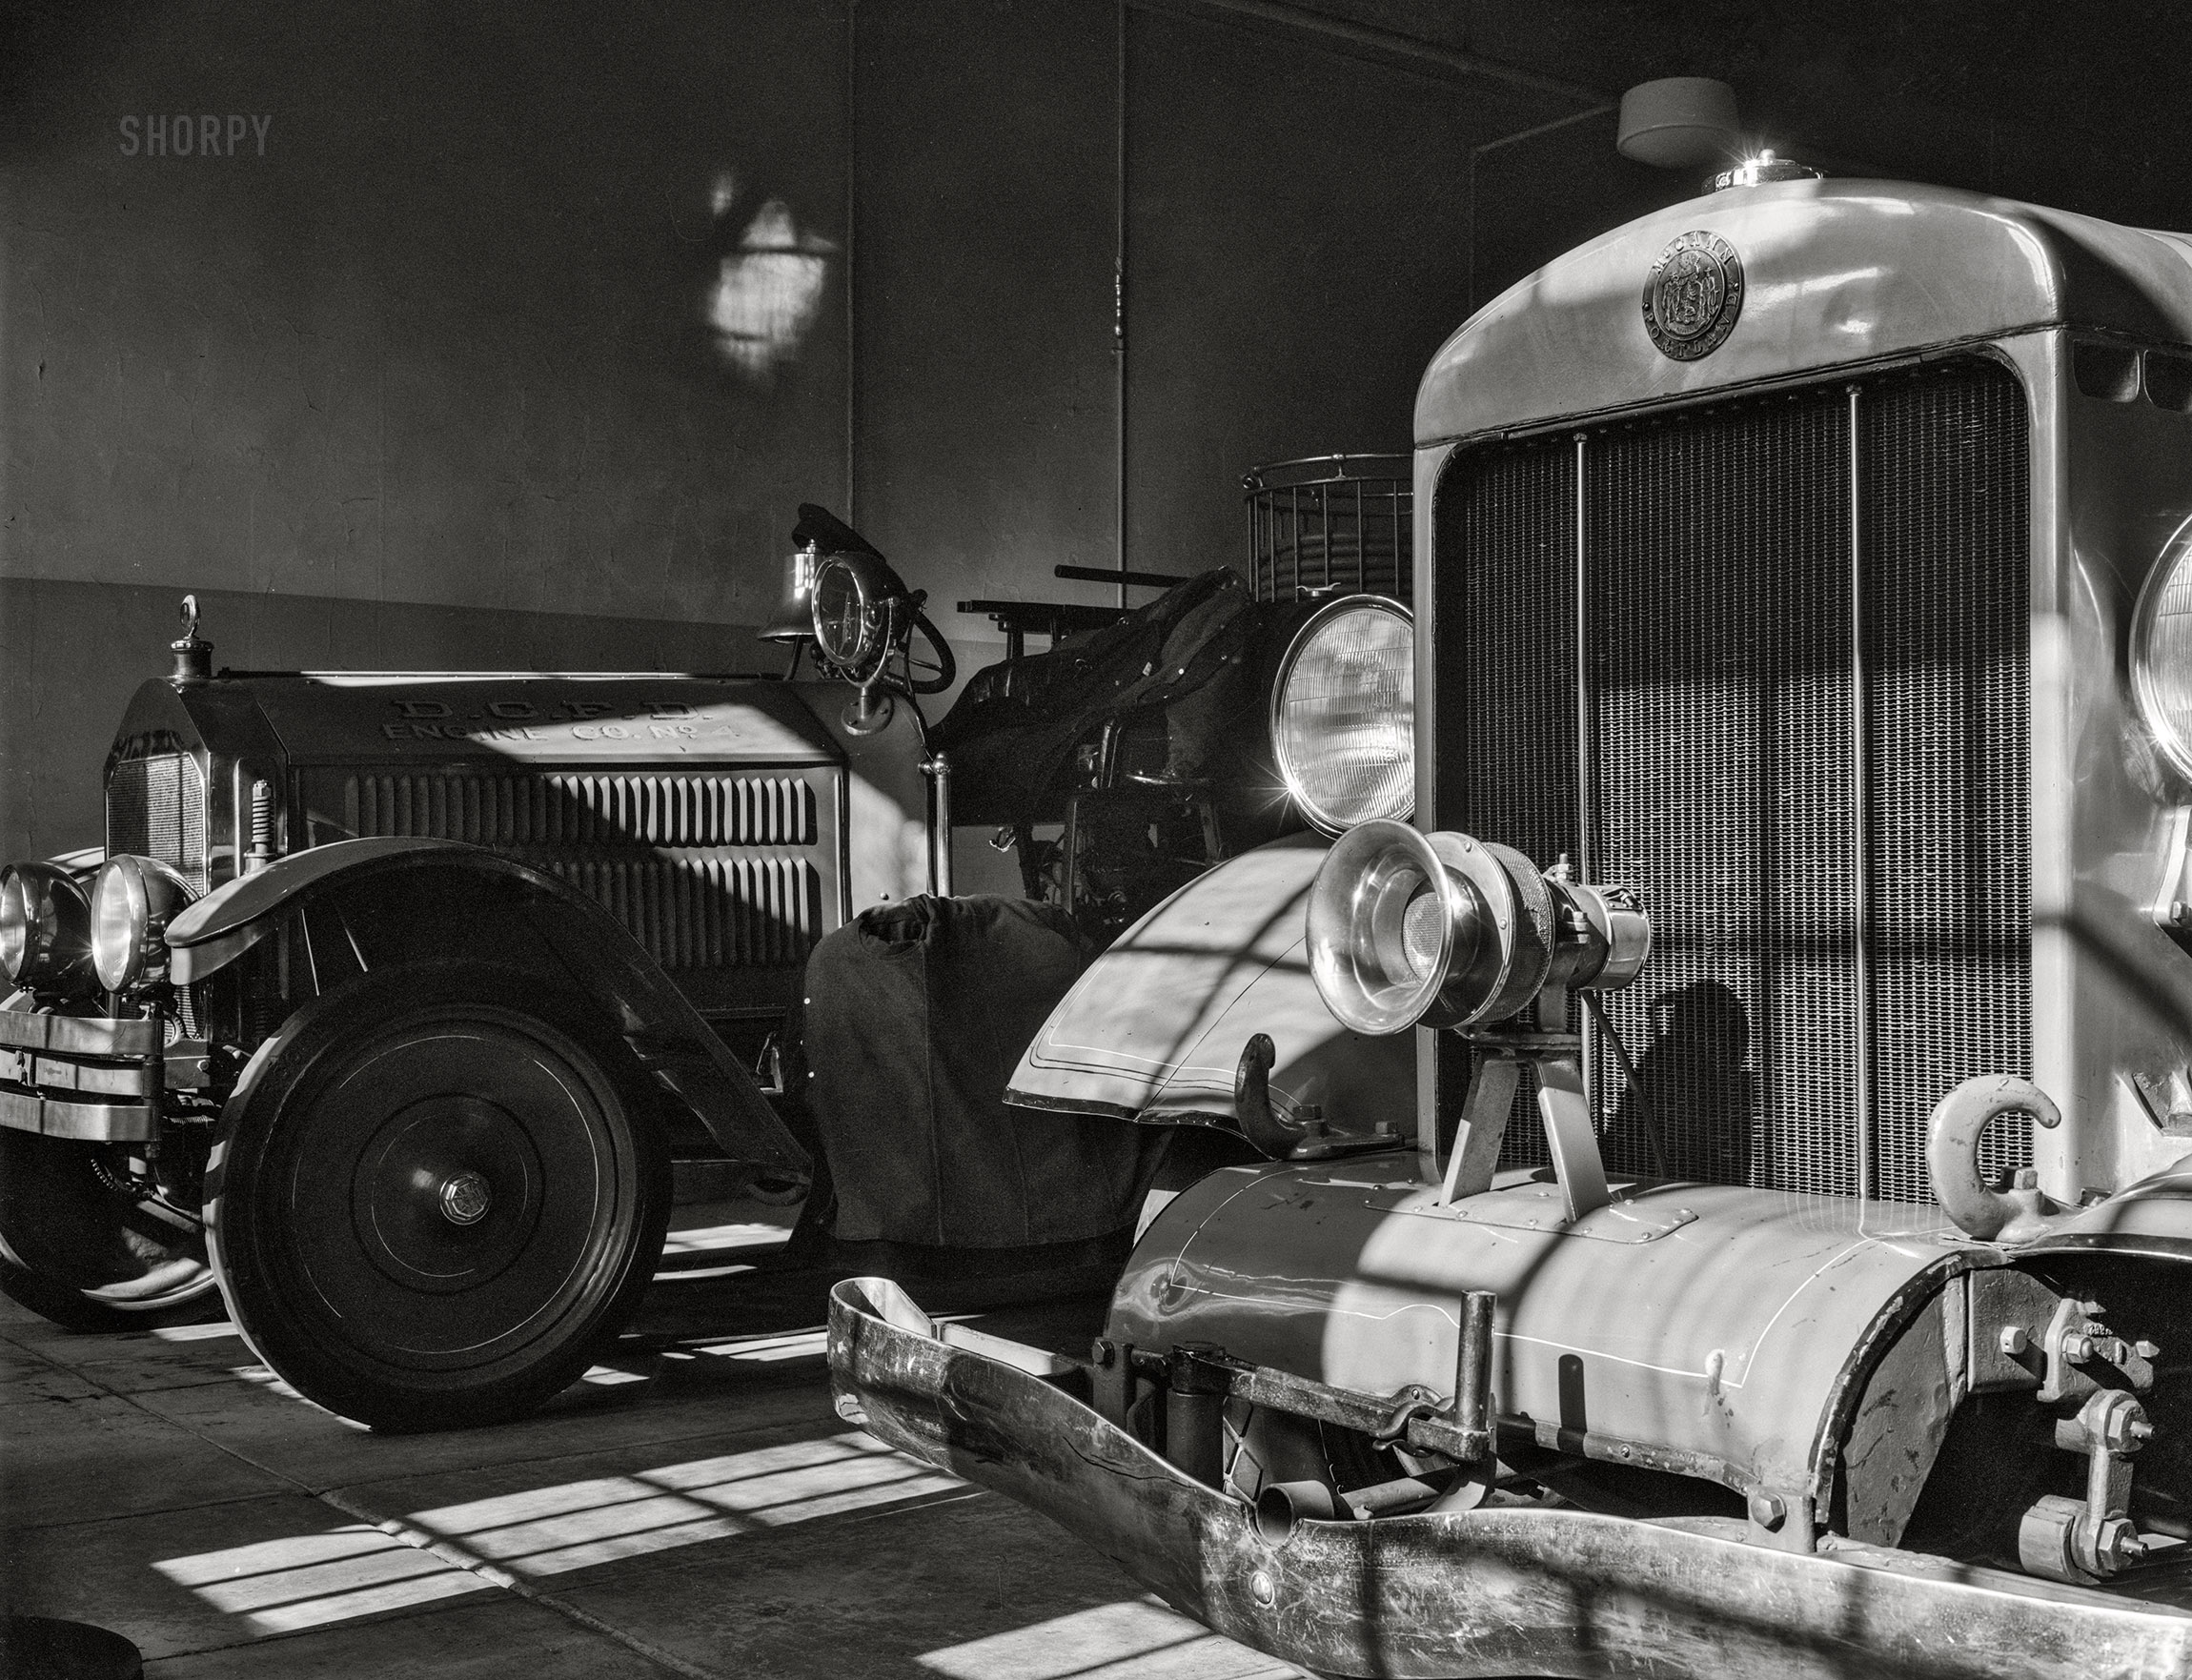 January 1943. Washington, D.C. "D.C.F.D. Engine Company No. 4 firehouse. Fire trucks." 4x5 inch acetate negative by Gordon Parks for the Office of War Information. View full size.